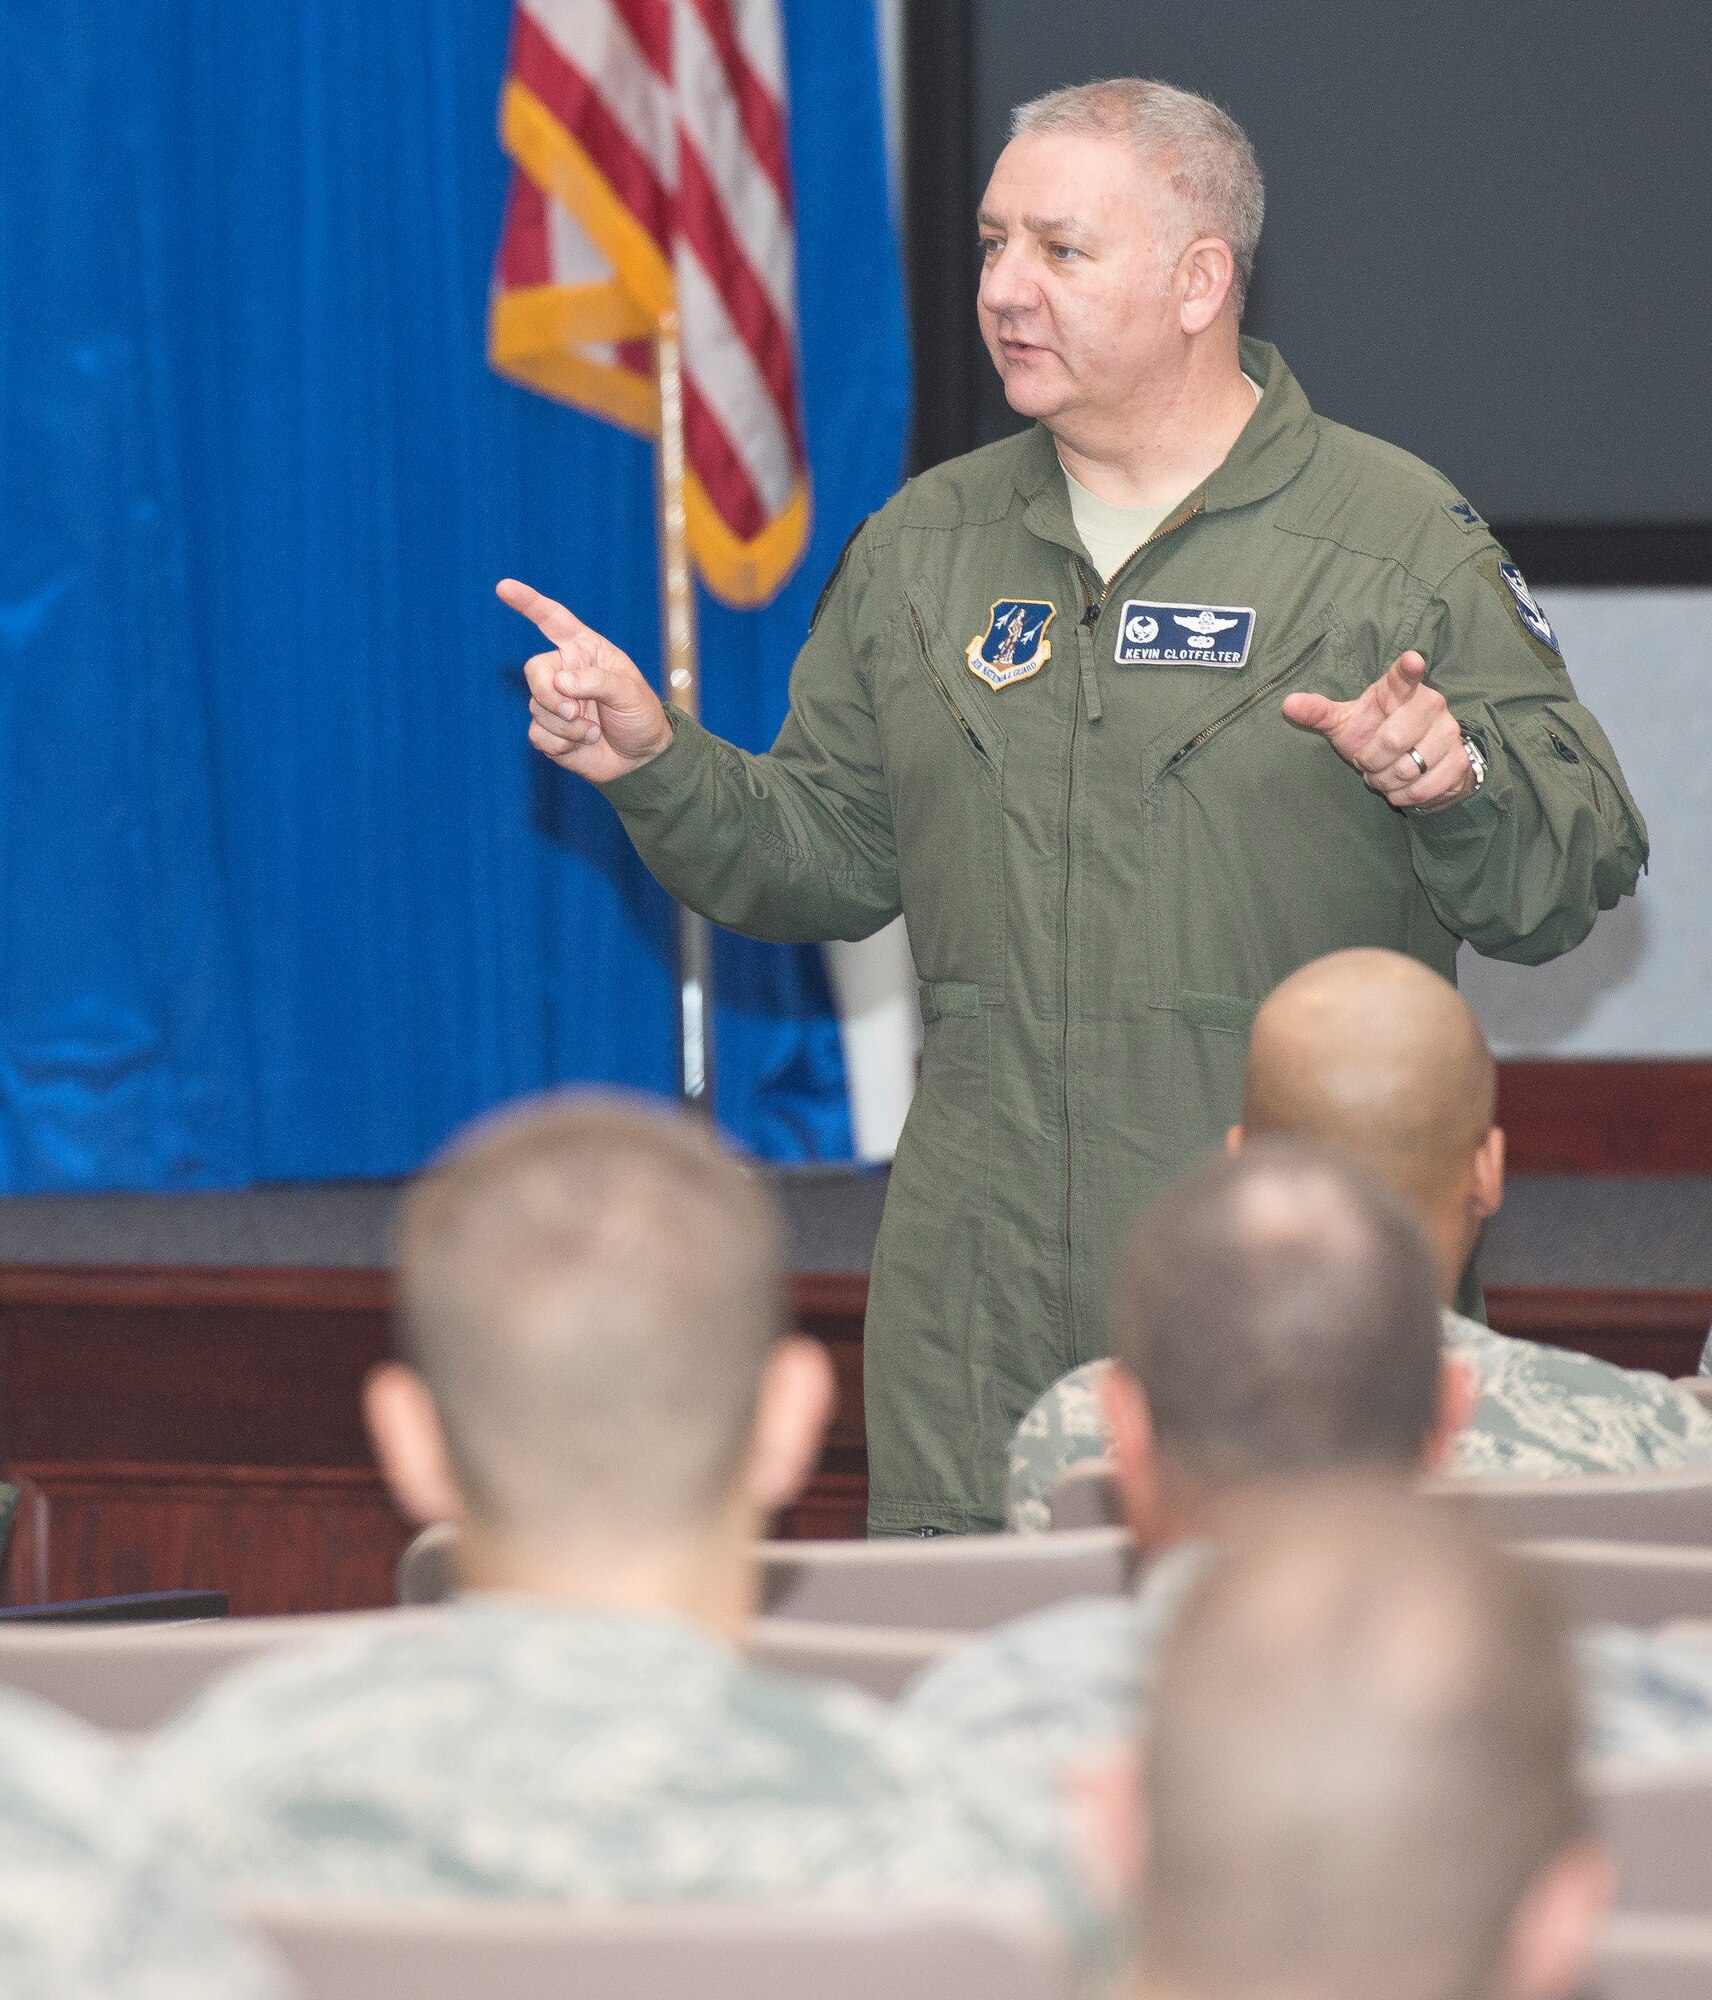 U.S. Air Force Col. Kevin Clotfelter, commander 116th Air Control Wing, speaks to Airmen from his wing about resiliency during a Wingman’s Day at Robins Air Force Base, Ga., April 12, 2013.  The Georgia Air National Guard wing took the day to focus on the resiliency of their Airmen, offering them training and information about the resources available to the Guardsmen and their families.  (U.S. Air National Guard photo by Master Sgt. Roger Parsons/Released)